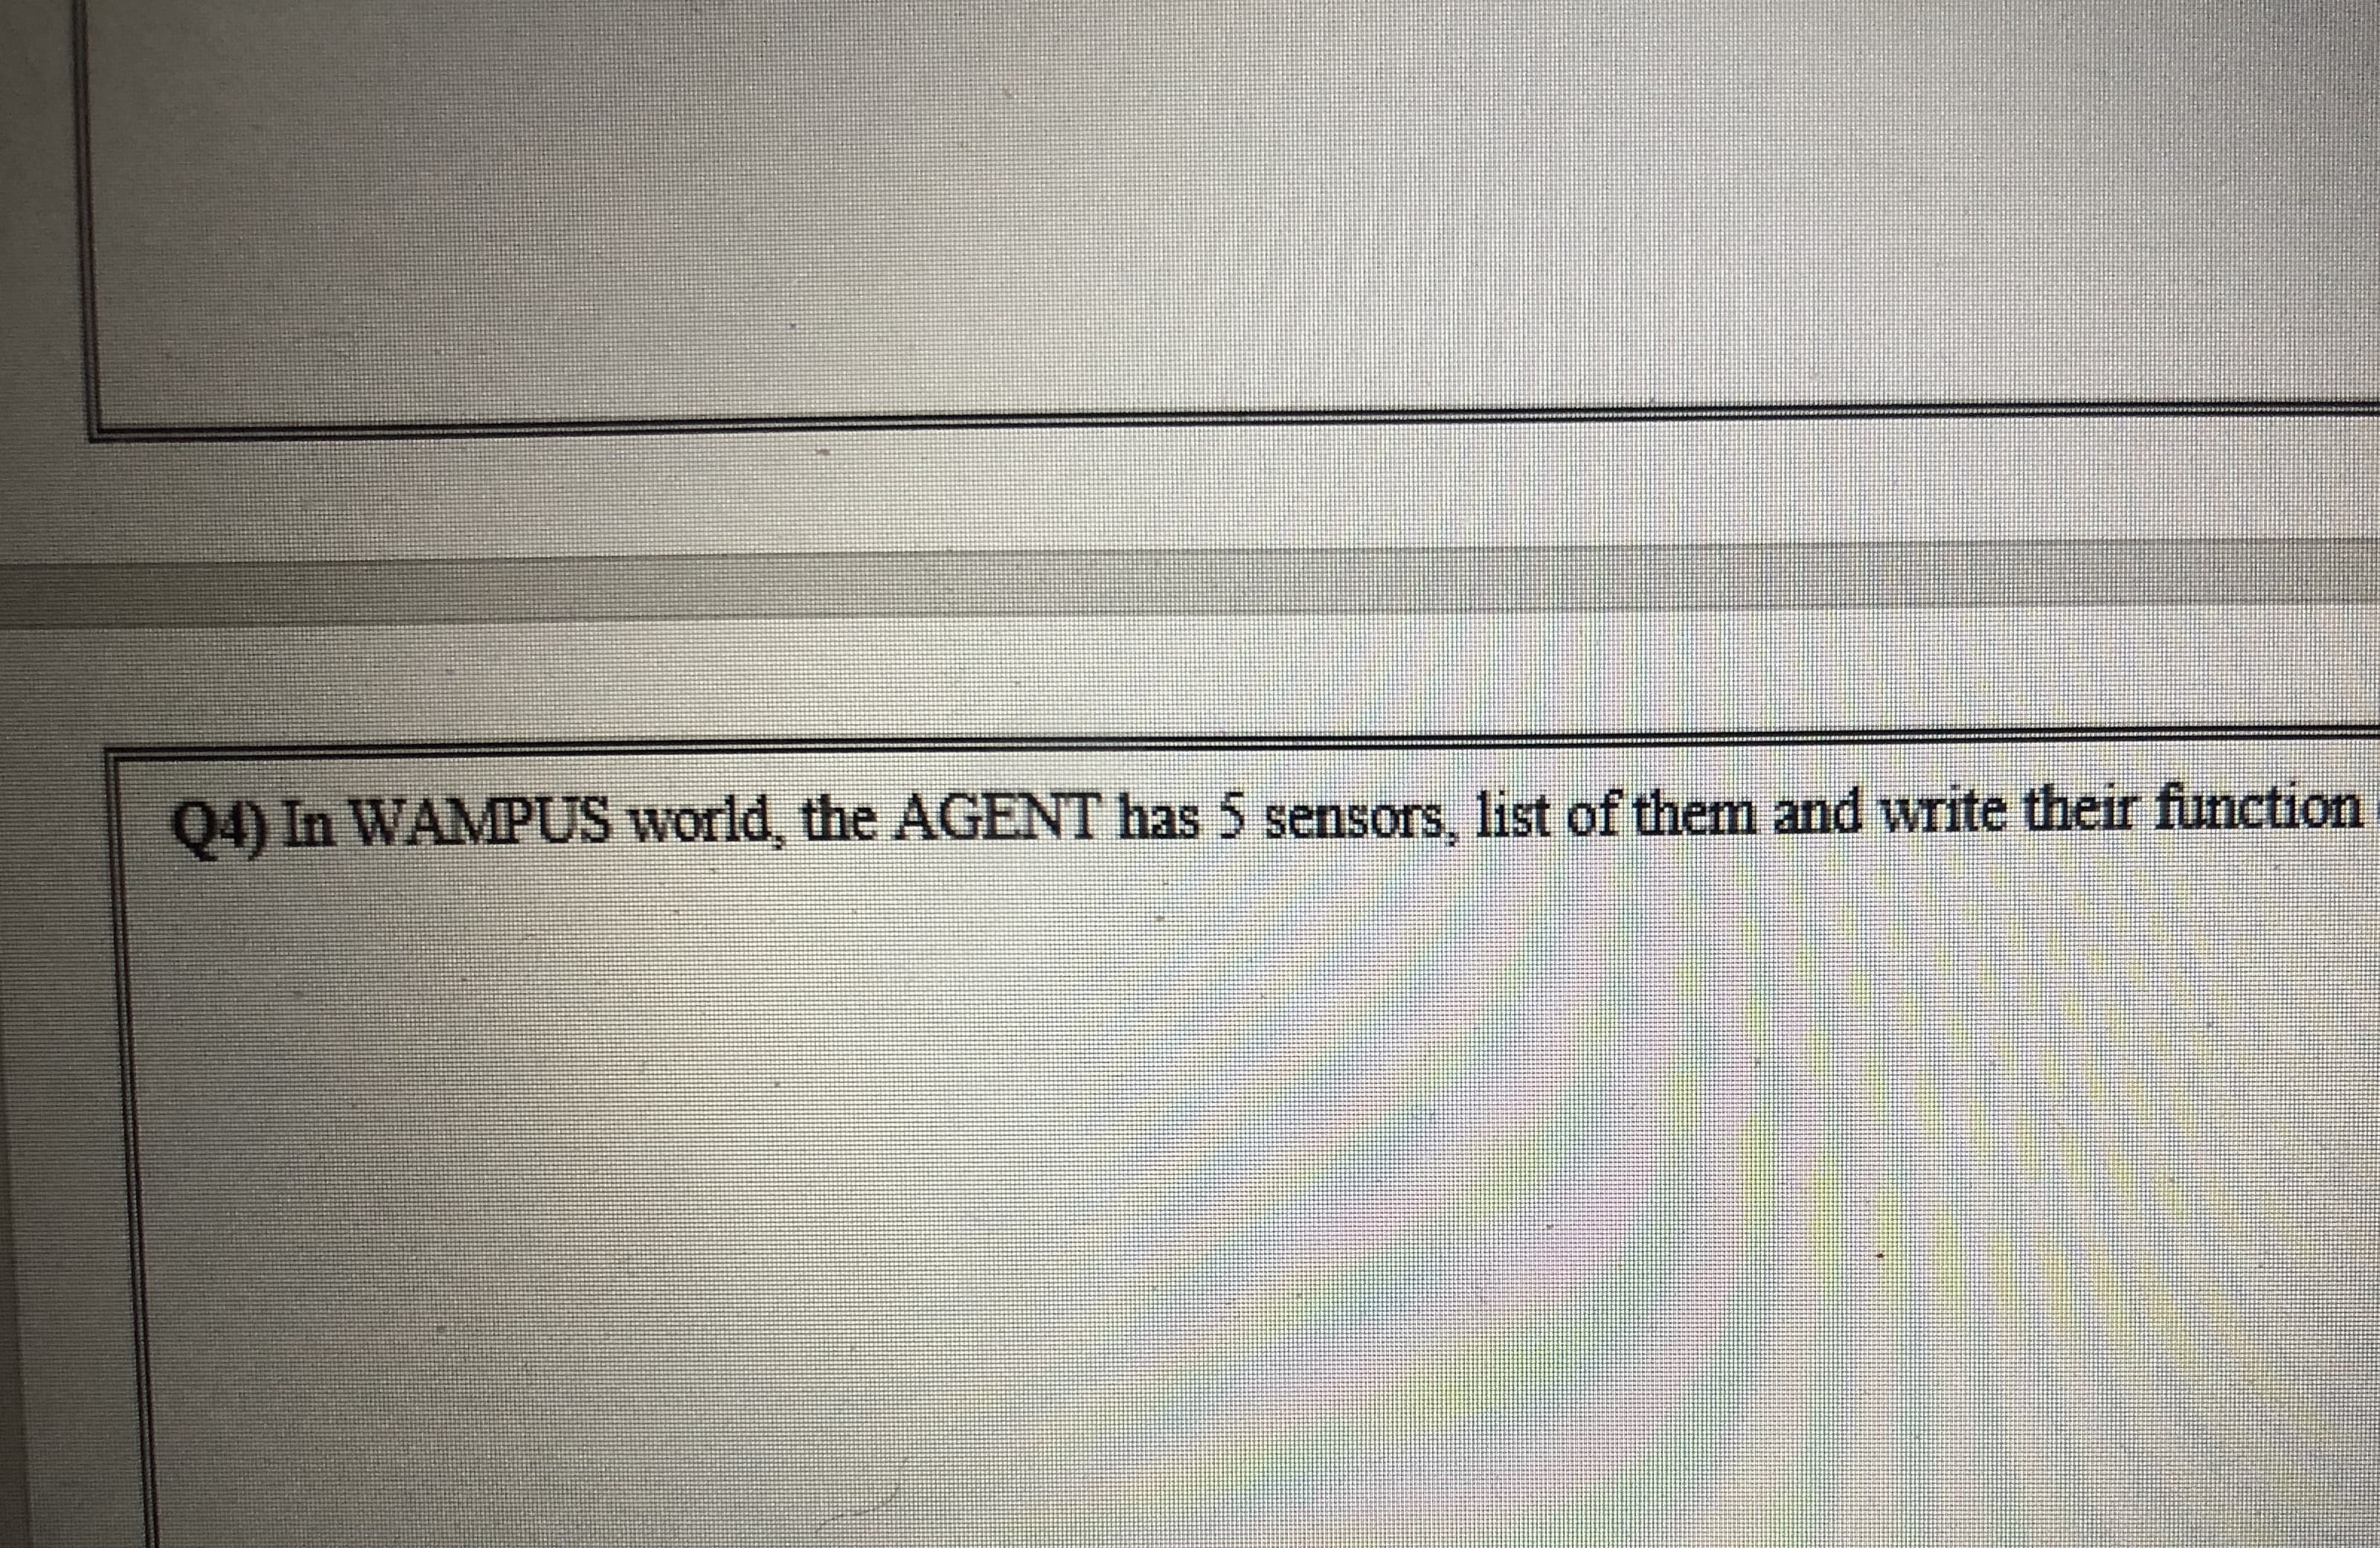 Q4) In WAMPUS world, the AGENT has 5 sensors, list of them and write their function
